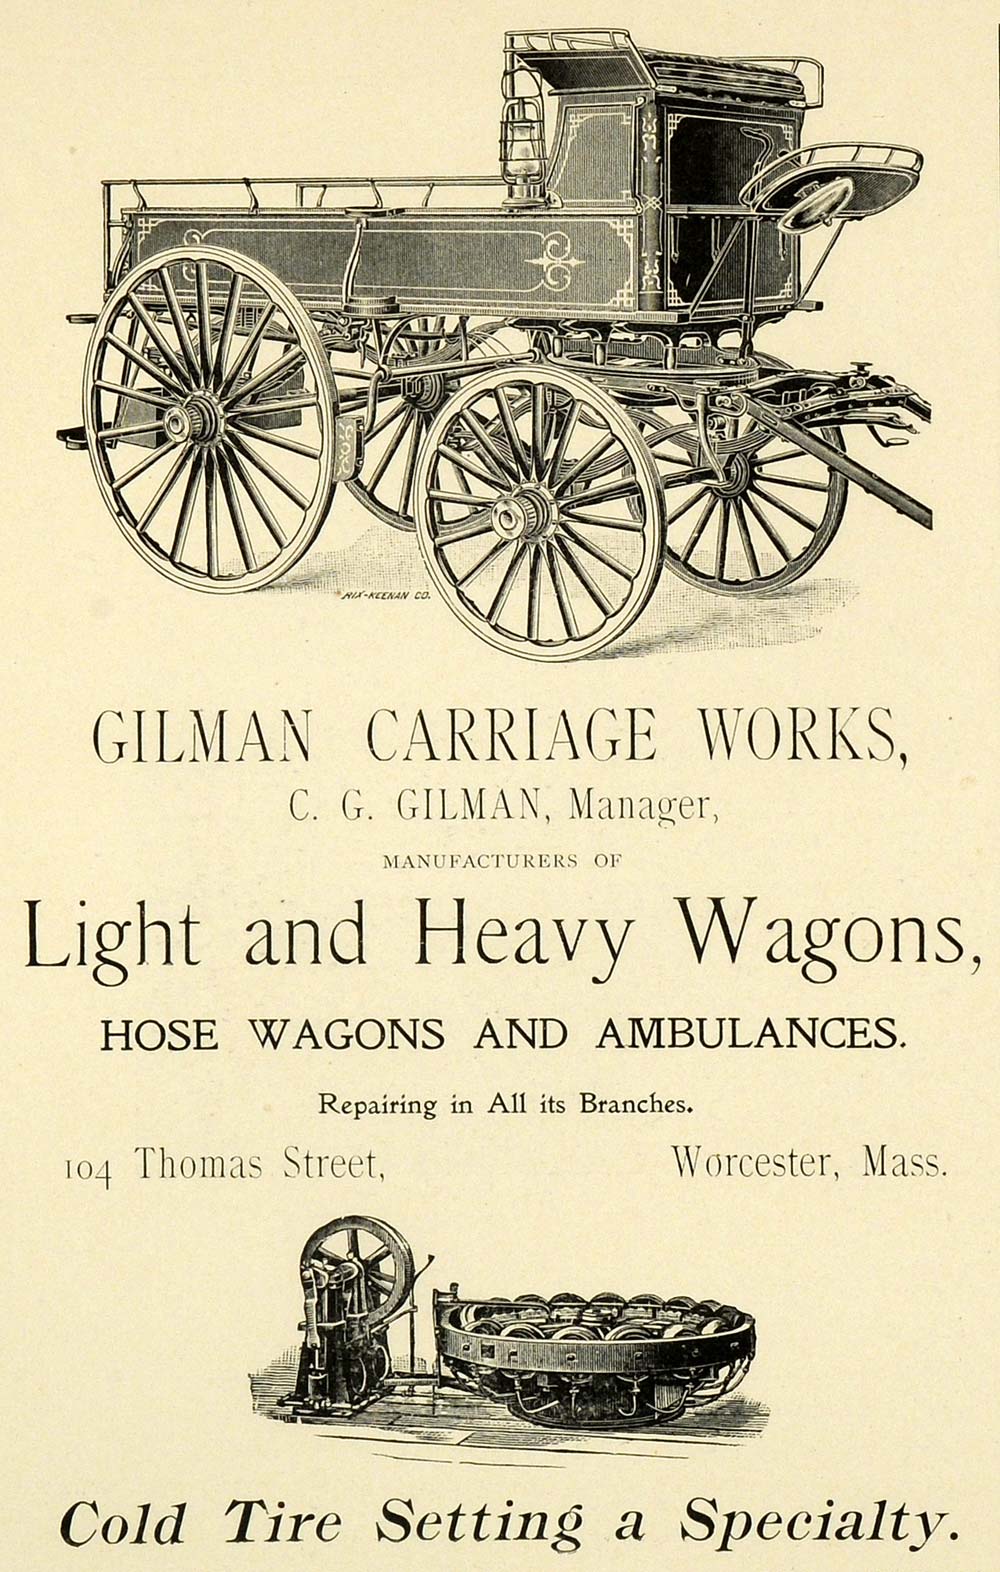 1898 Ad Gilman Carriage Works Heavy Wagons Thomas Street Worcester PV1